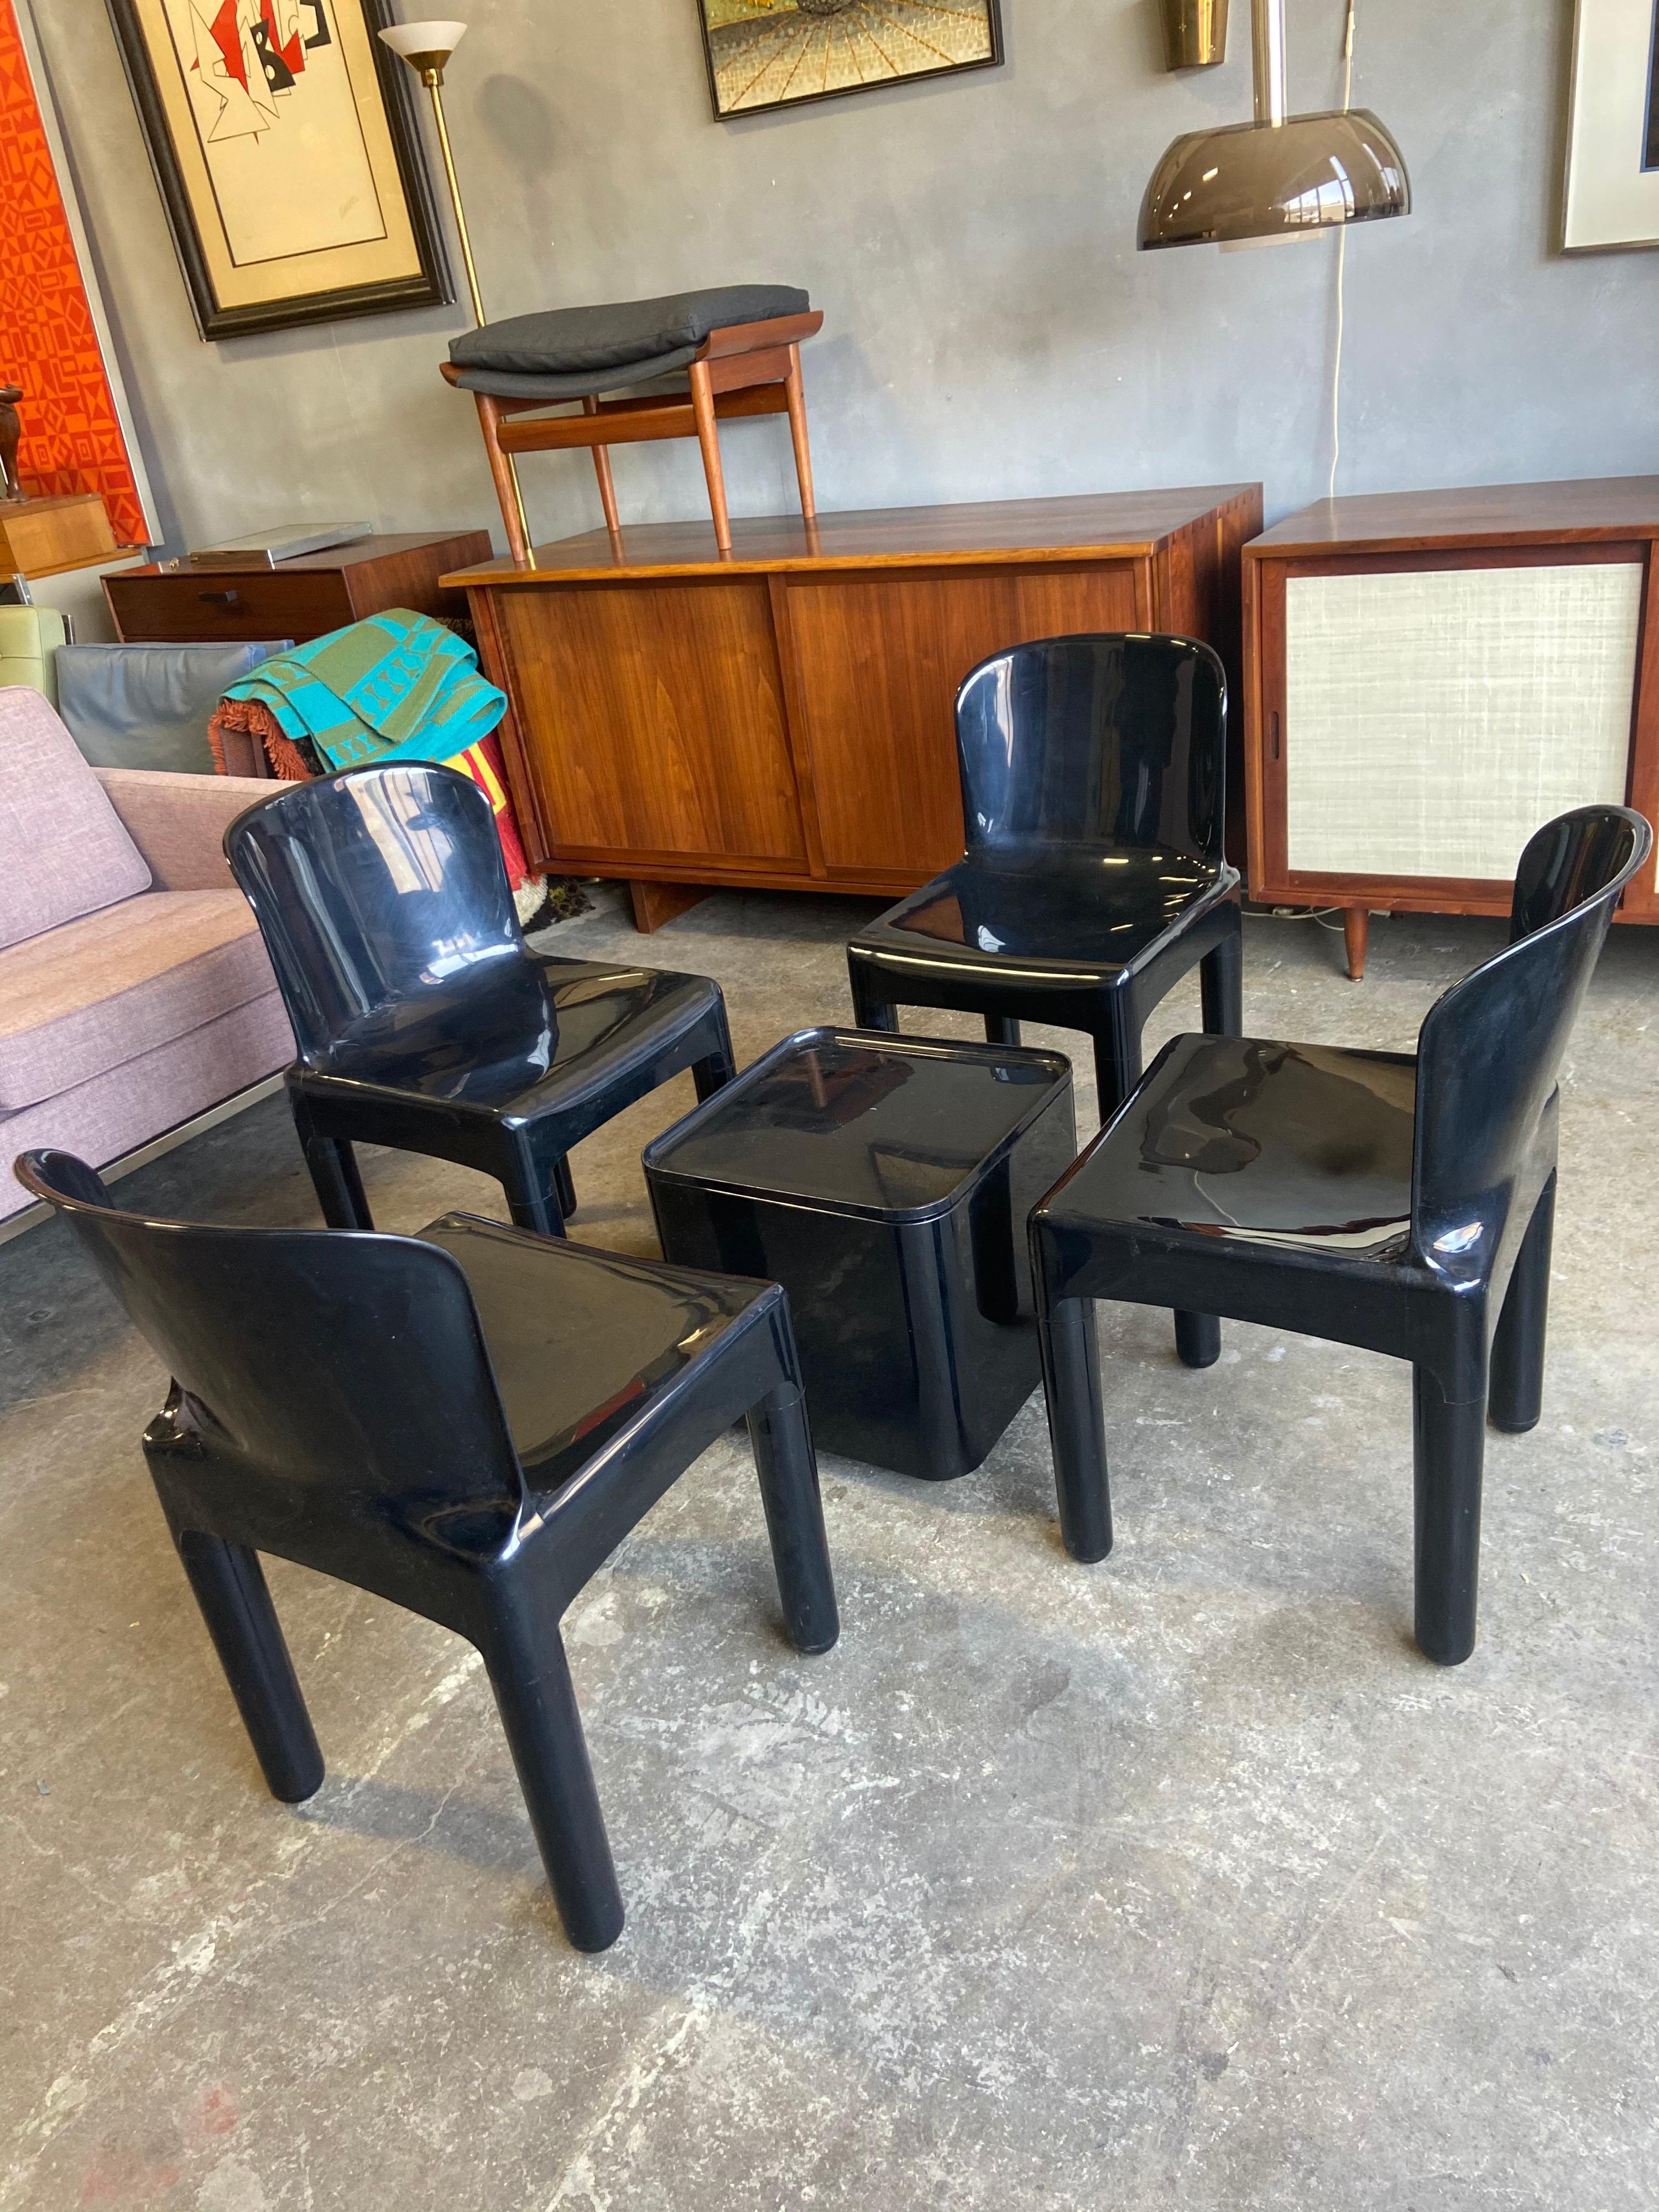 For your consideration are these fabulous and rare set of four black molded plastic dining chairs and table by Marcello Siard. Featuring a sturdy and classic Italian Modern Space age look that Siard, Joe Colombo, Kartell, Giancarlo Pieretti,